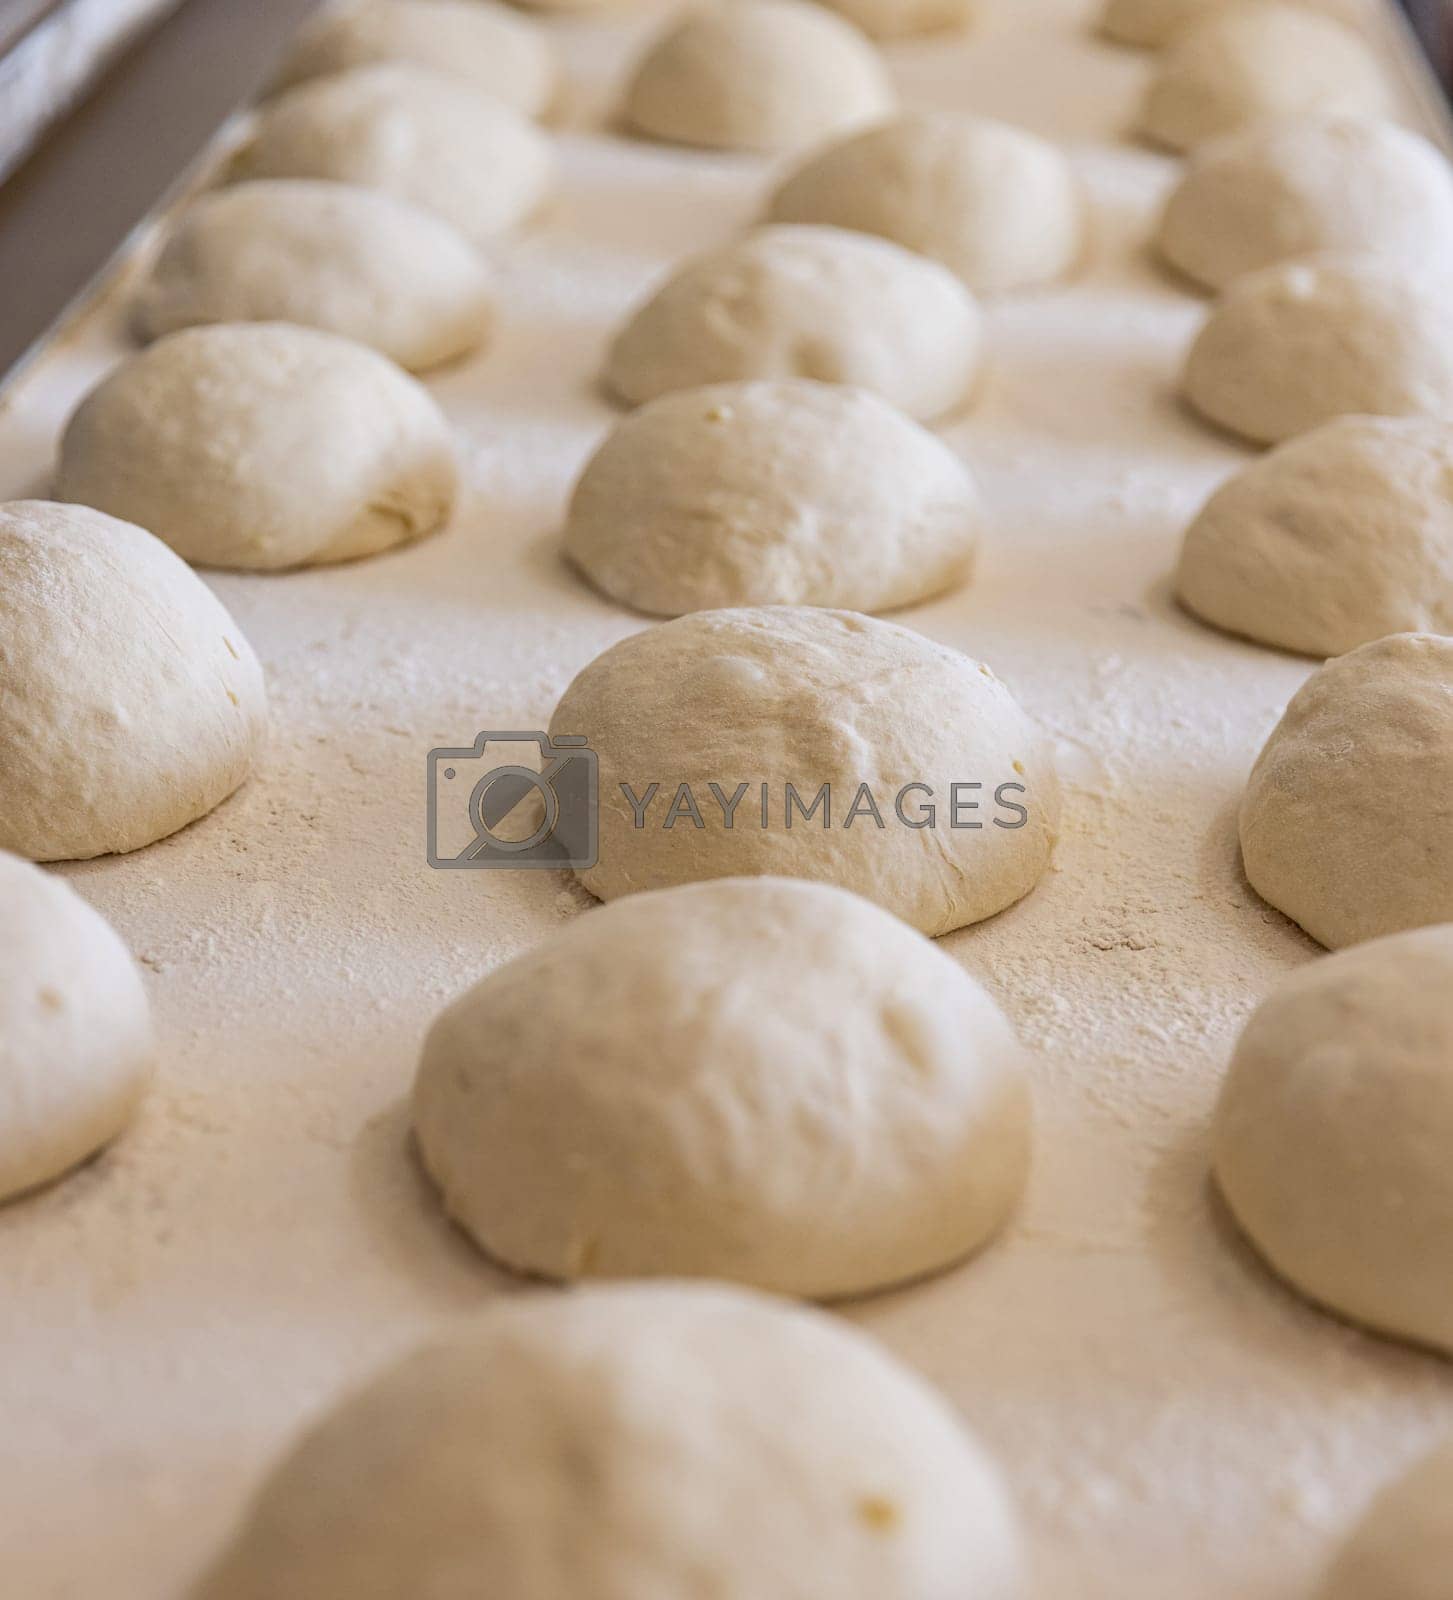 Royalty free image of Raw dough of bread  by grafvision